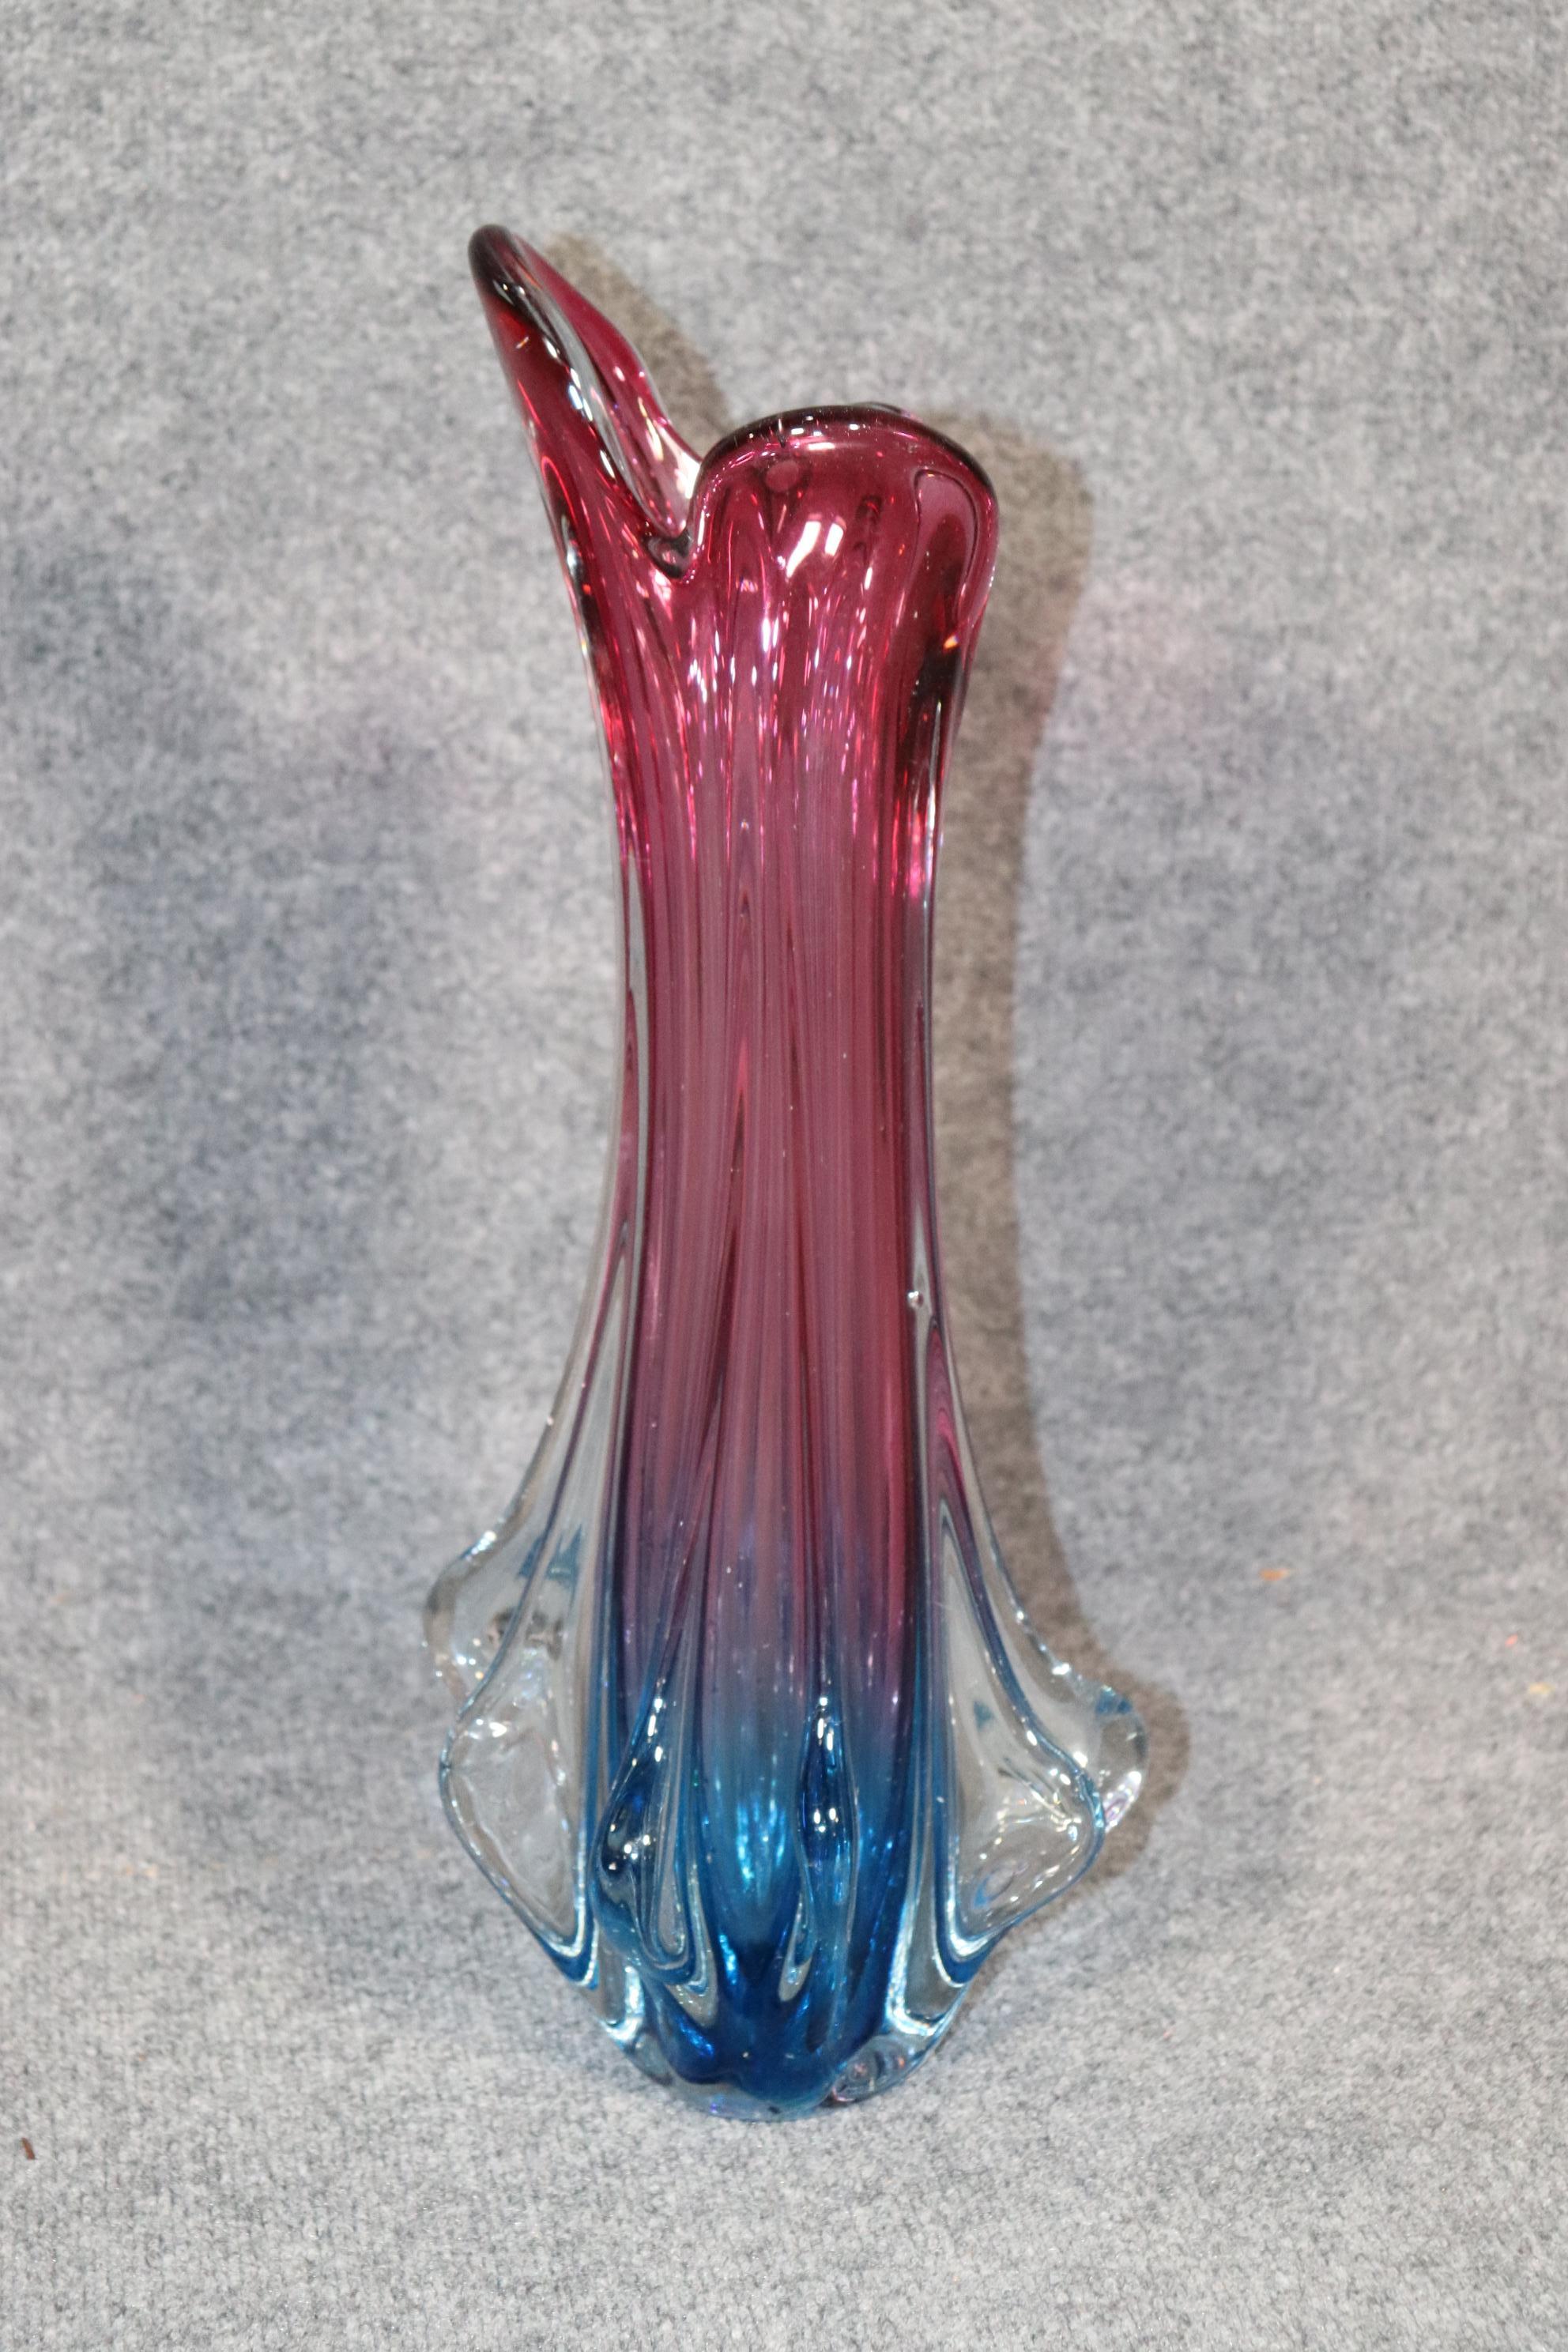 Dimensions: H: 20.5in W: 7.25in D: 7.25in
This Mid Century Modern MCM Large Beautiful Murano Multi Colored Vase is an Incredible example of some of the fine work that Murano Produced. The size and colors of this piece make it a rare commodity. This